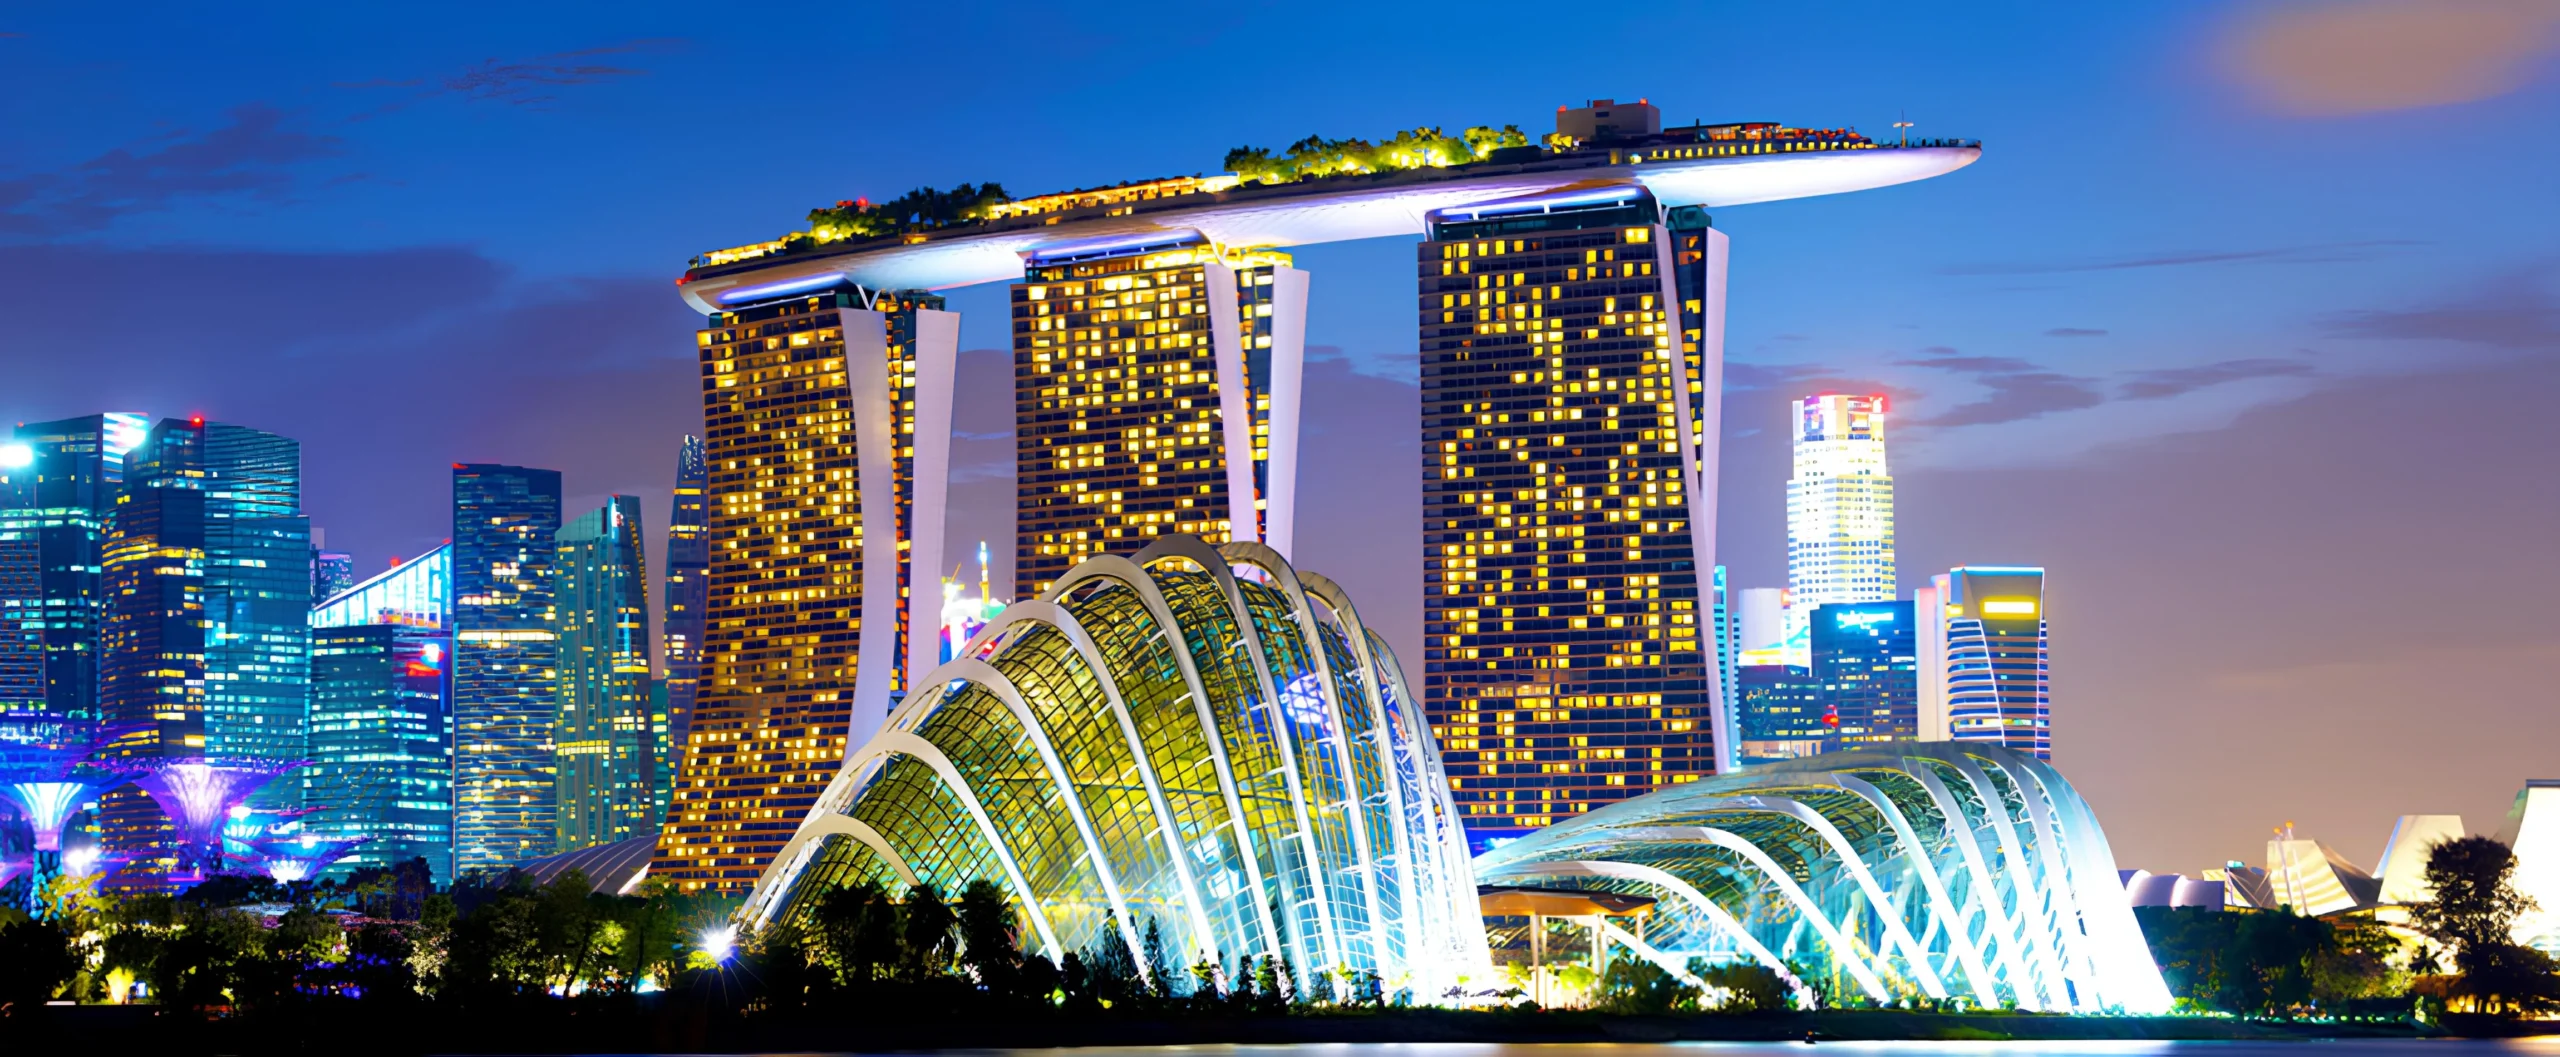 Singapore's best tourist attractions